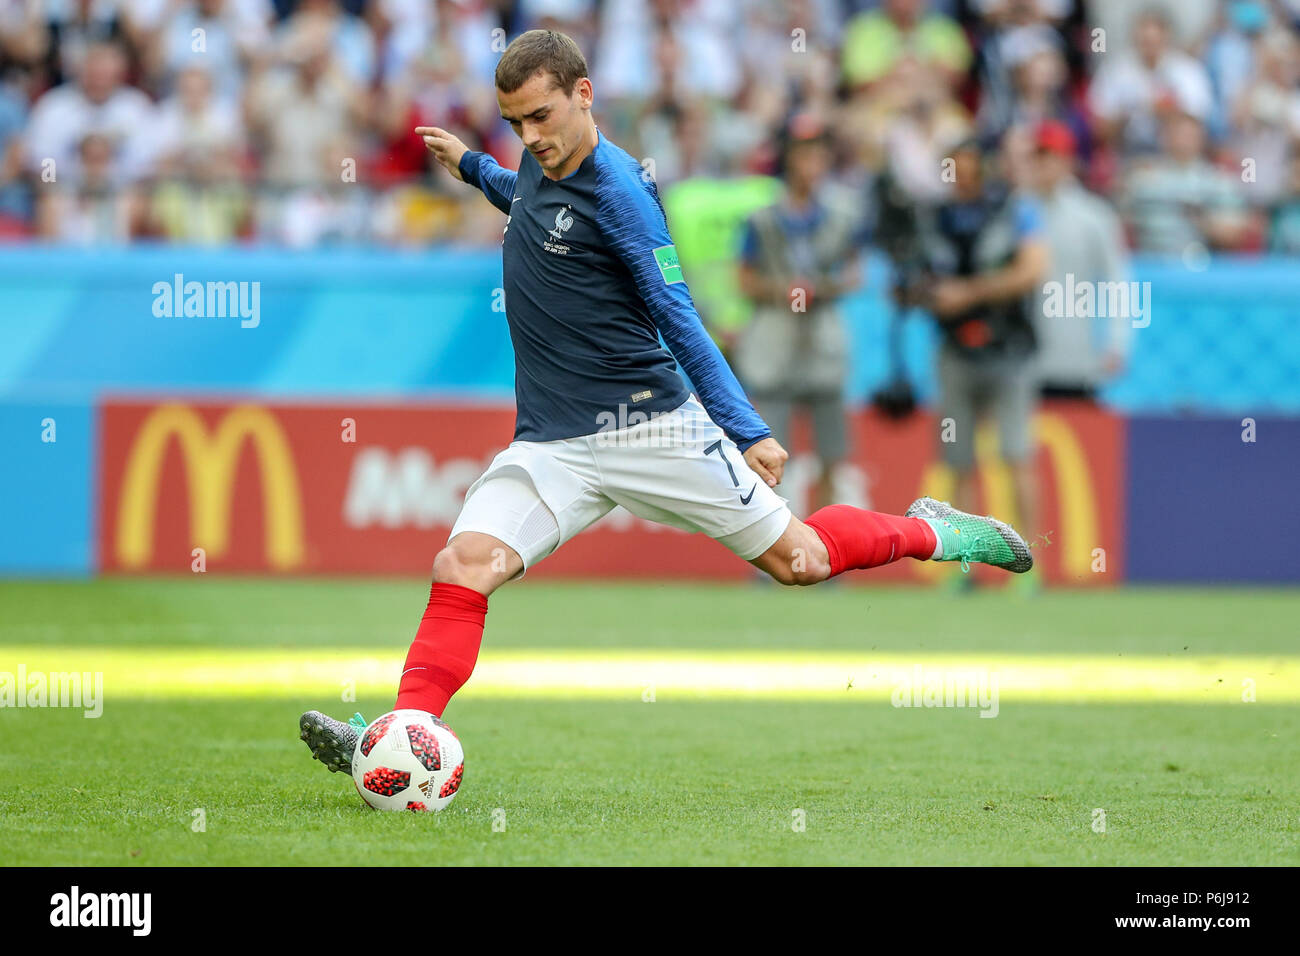 Kazan, Russia, 30 June 2018. Griezmann player of France during match against Argentina game valid for the Eighth Finals of the World Cup in Russia 2018 at the Kazan Arena in Russia this Saturday, 30. (PHOTO: WILLIAM VOLCOV/BRAZIL PHOTO PRESS) Credit: Brazil Photo Press/Alamy Live News Stock Photo